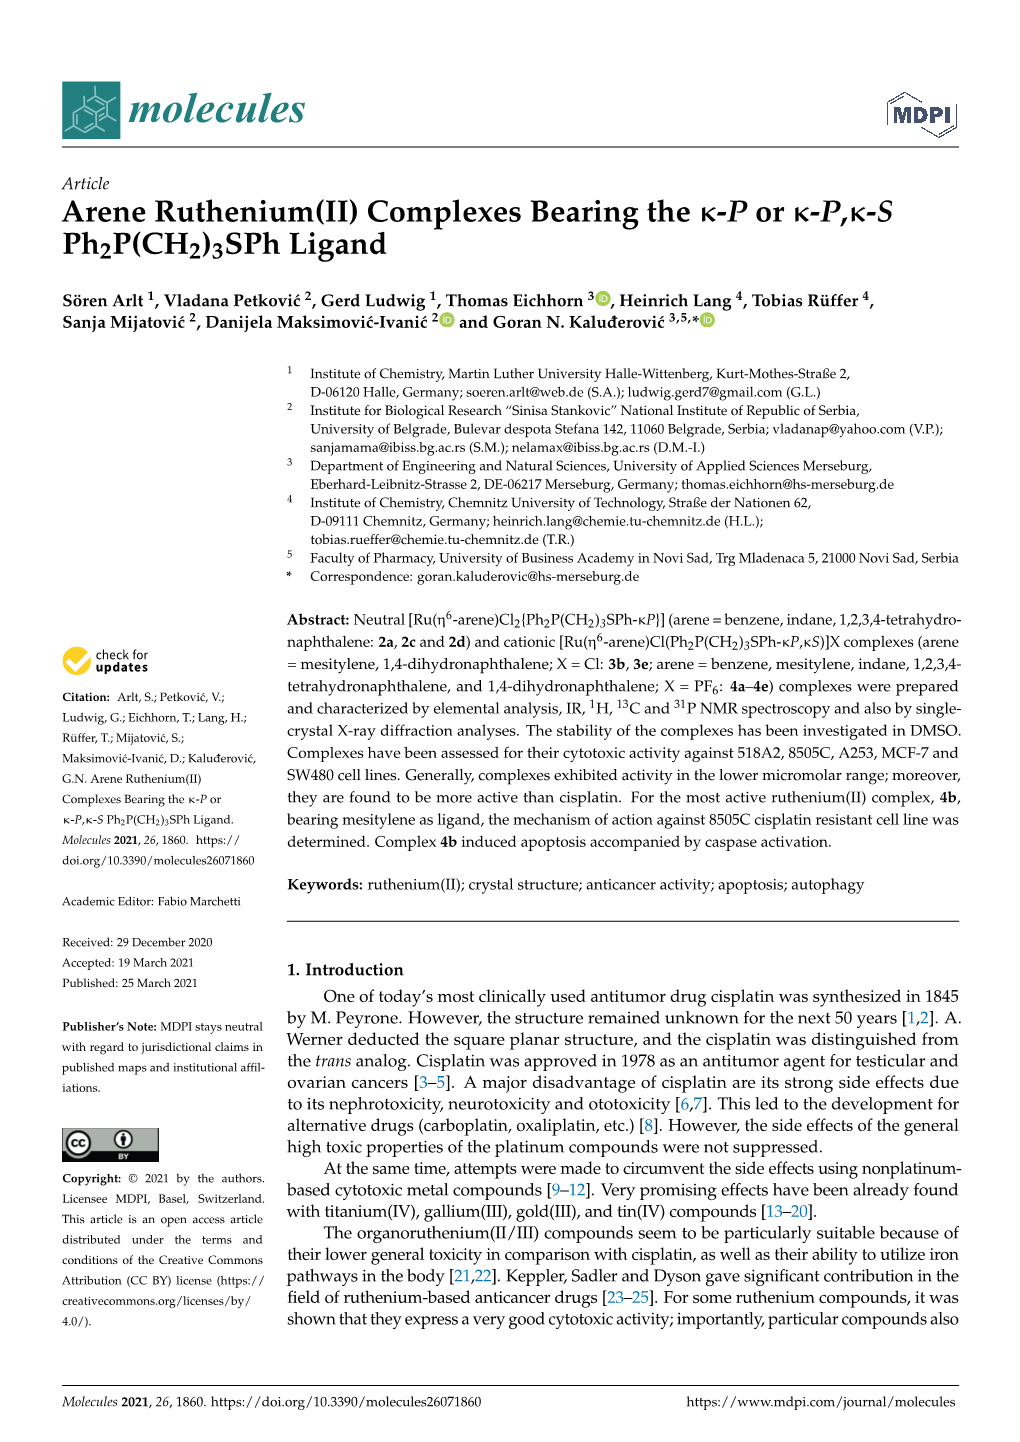 Arene Ruthenium(II) Complexes Bearing the -P Or -P,-S Ph2p(CH2)